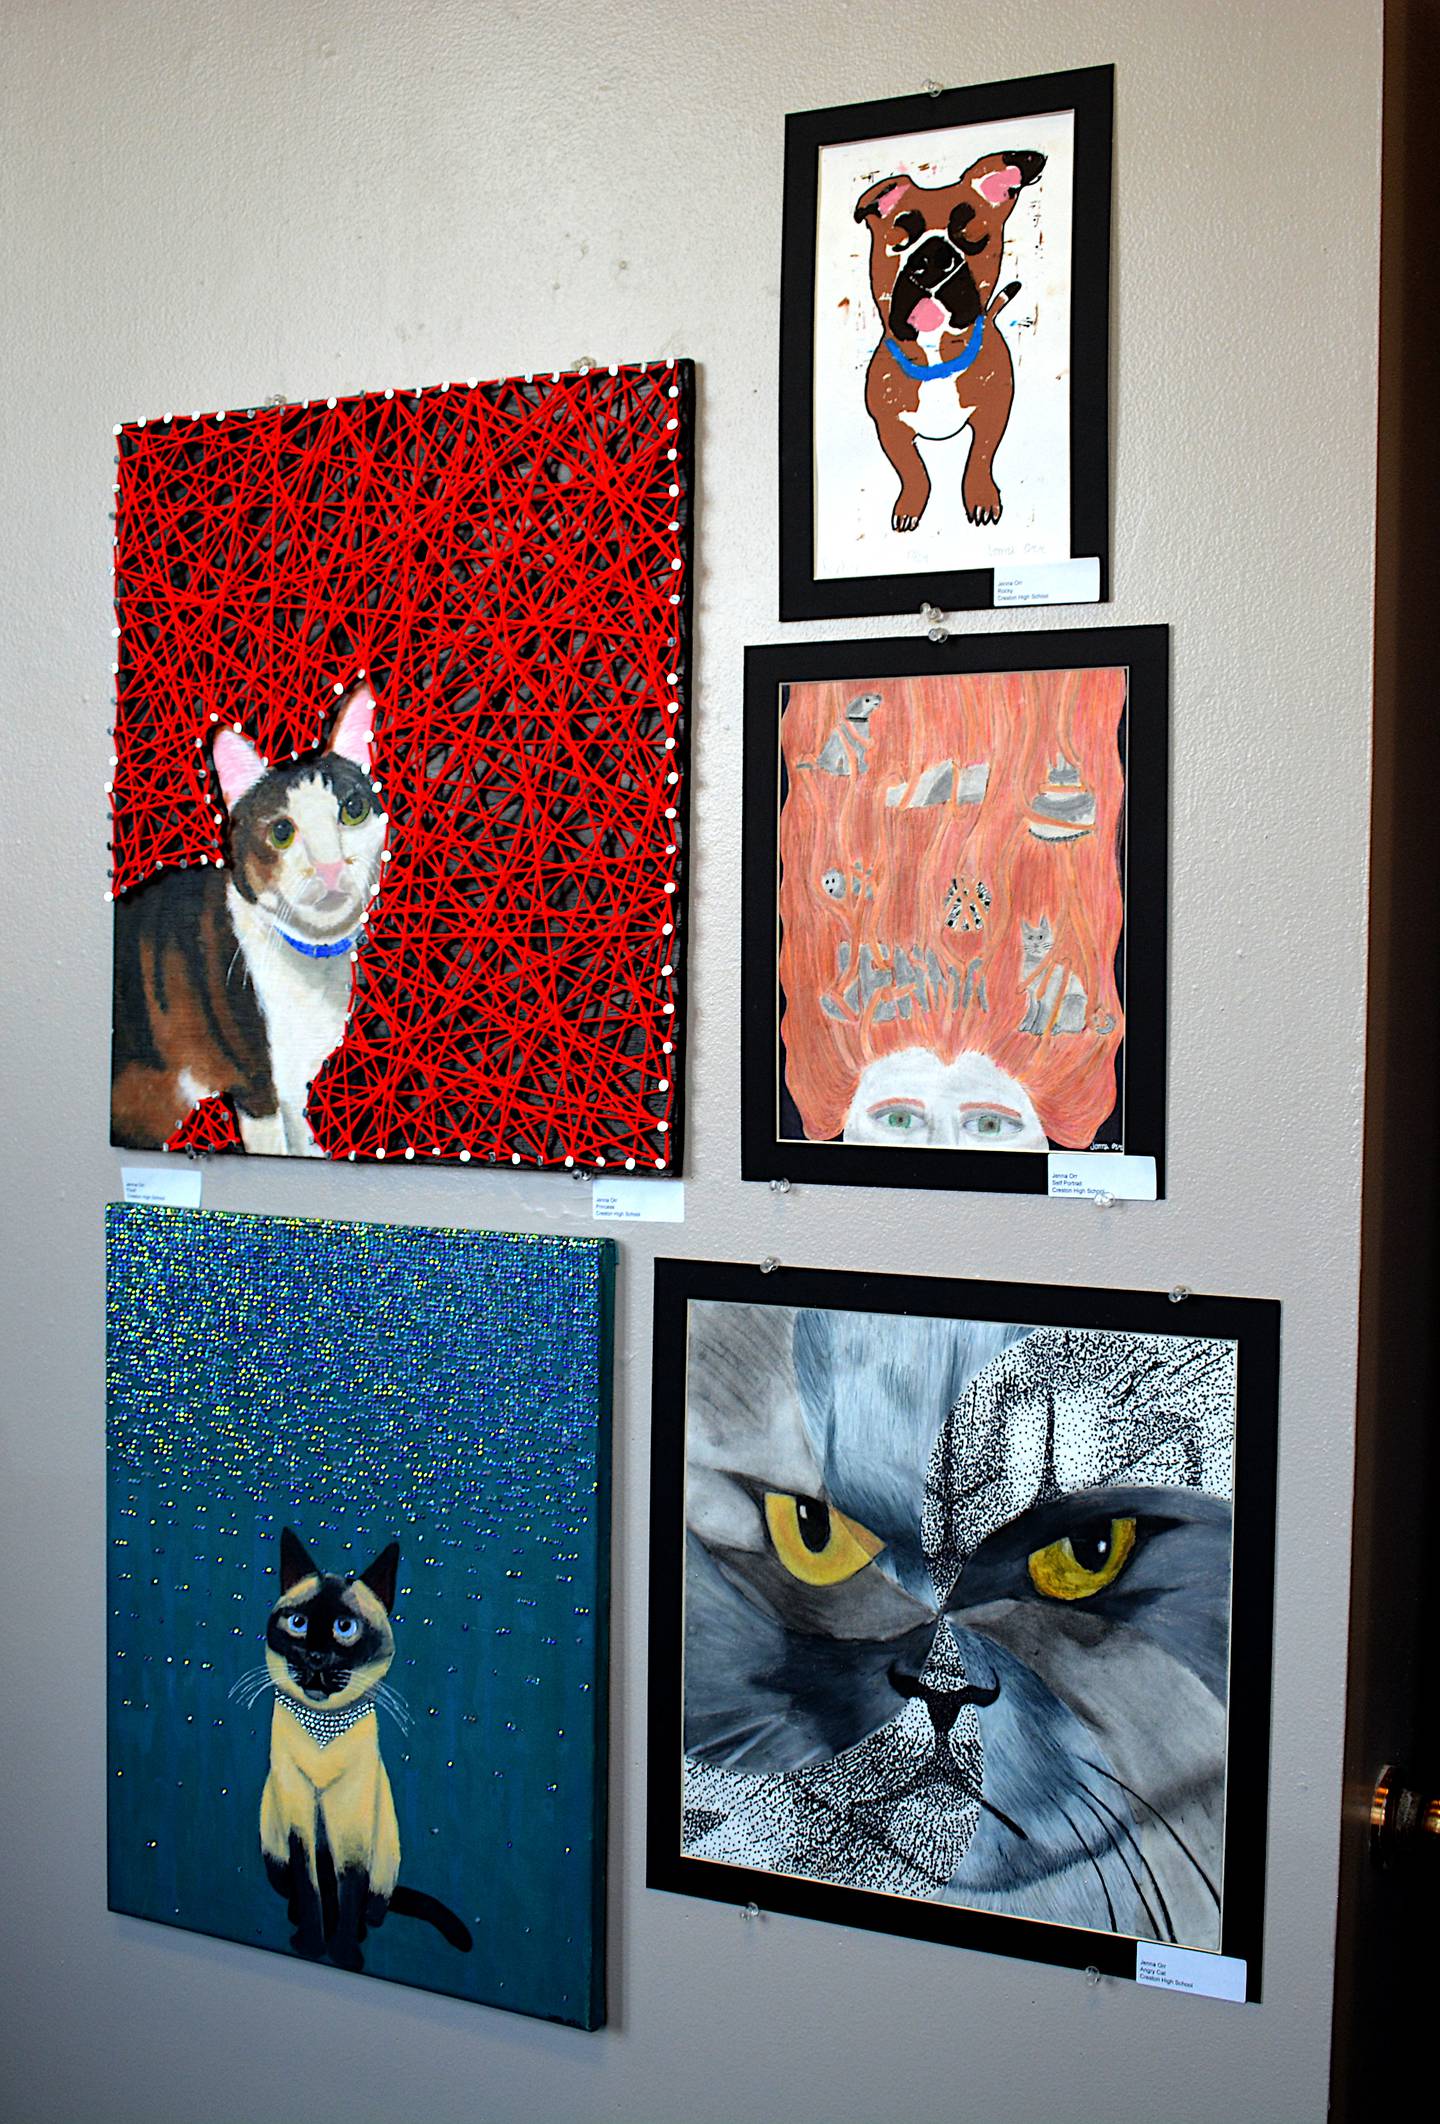 A collection of art pieces created by Jenna Orr with a central focus on cats.